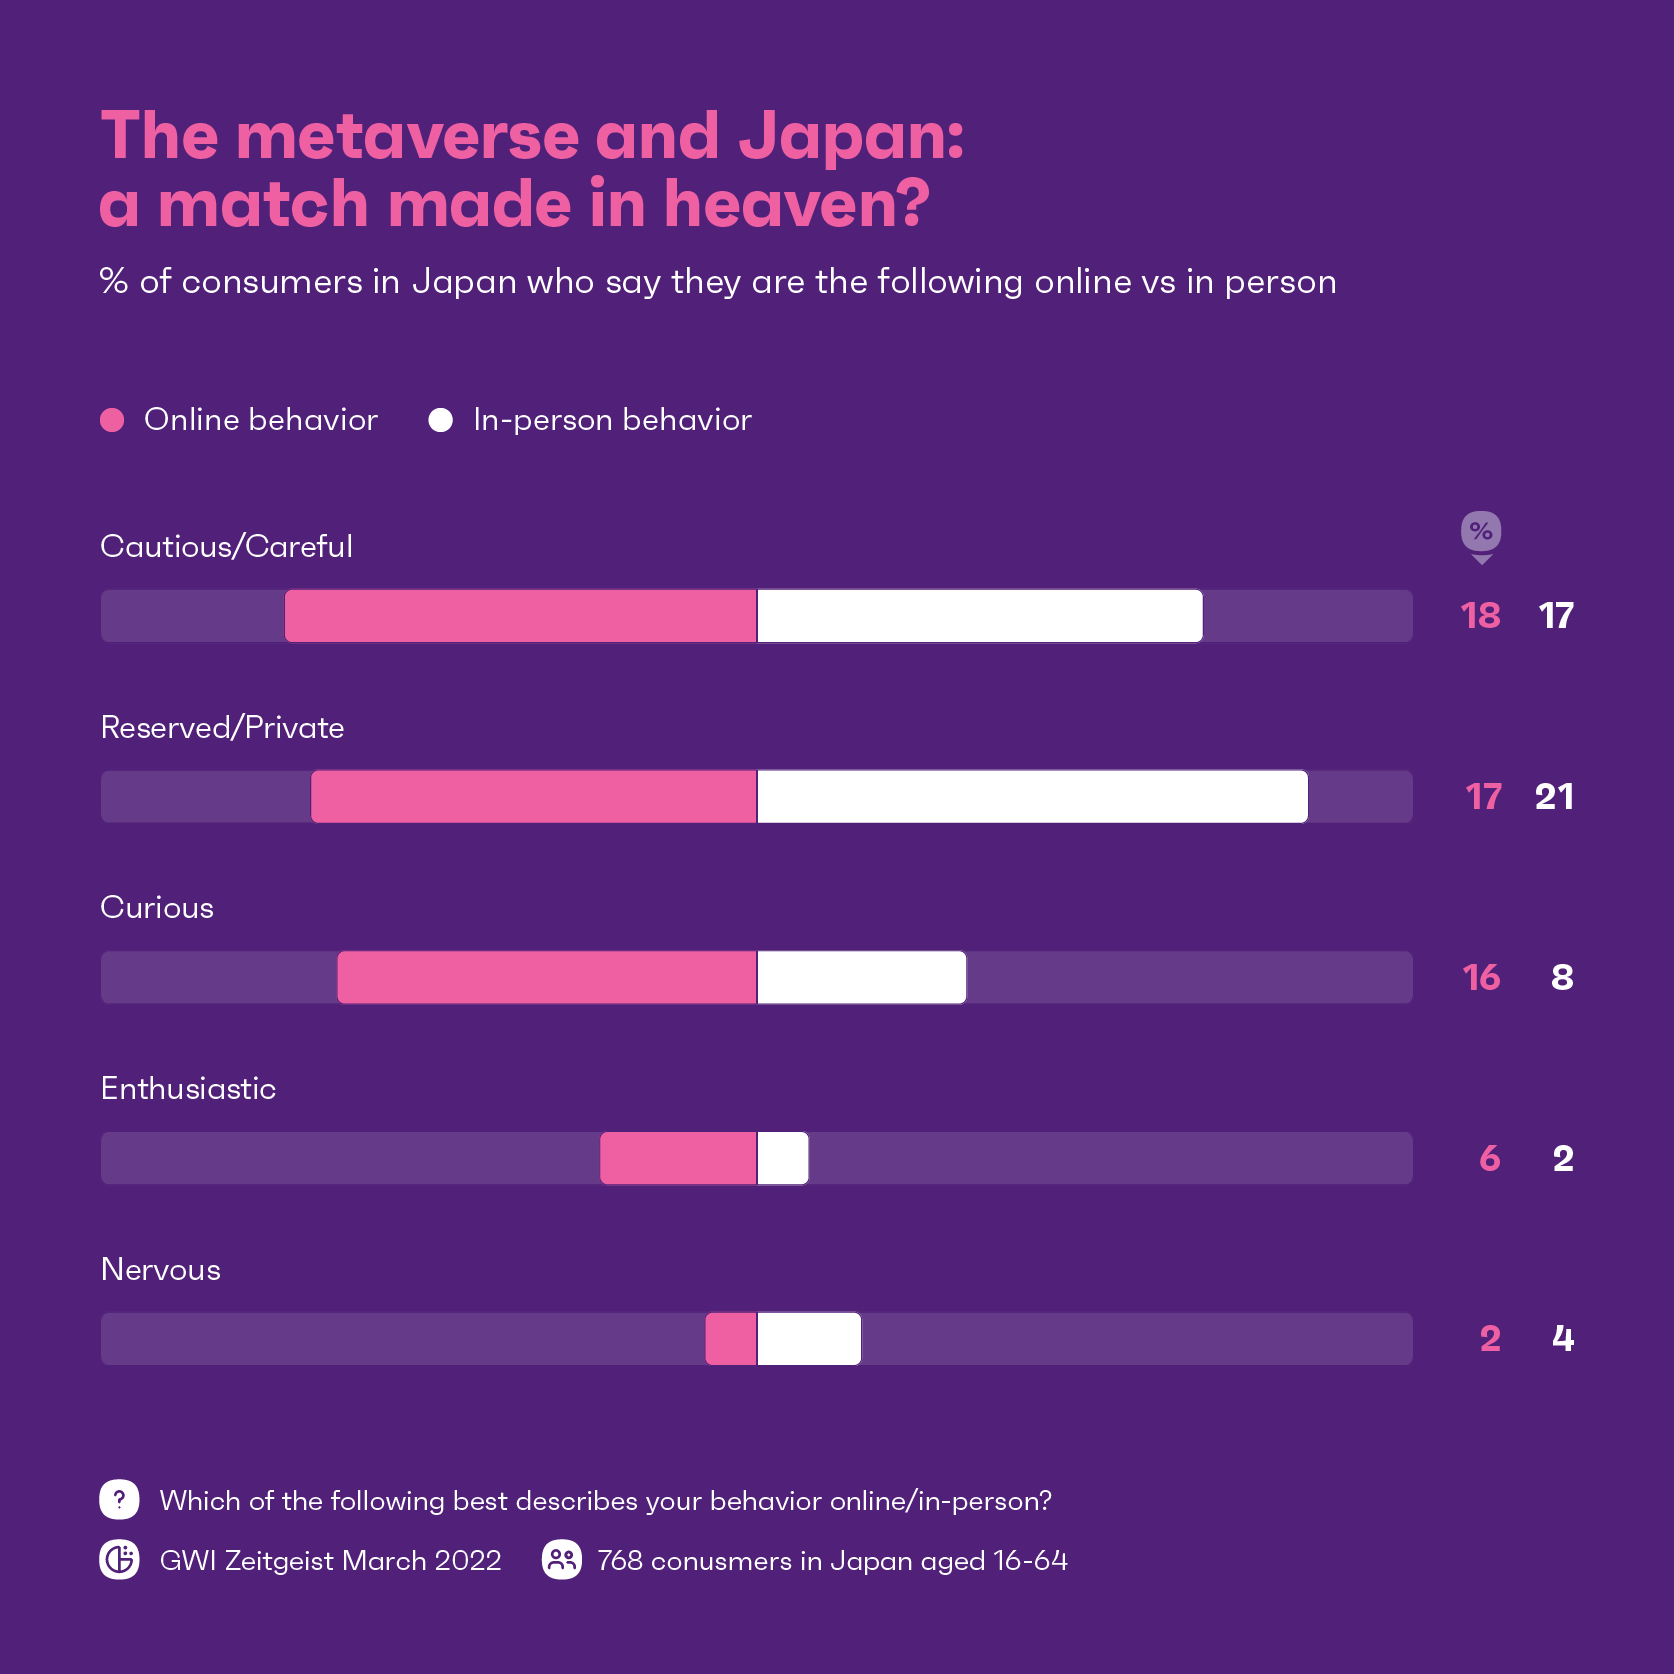 Chart showing how Japanese consumers would describes themselves online vs in-person